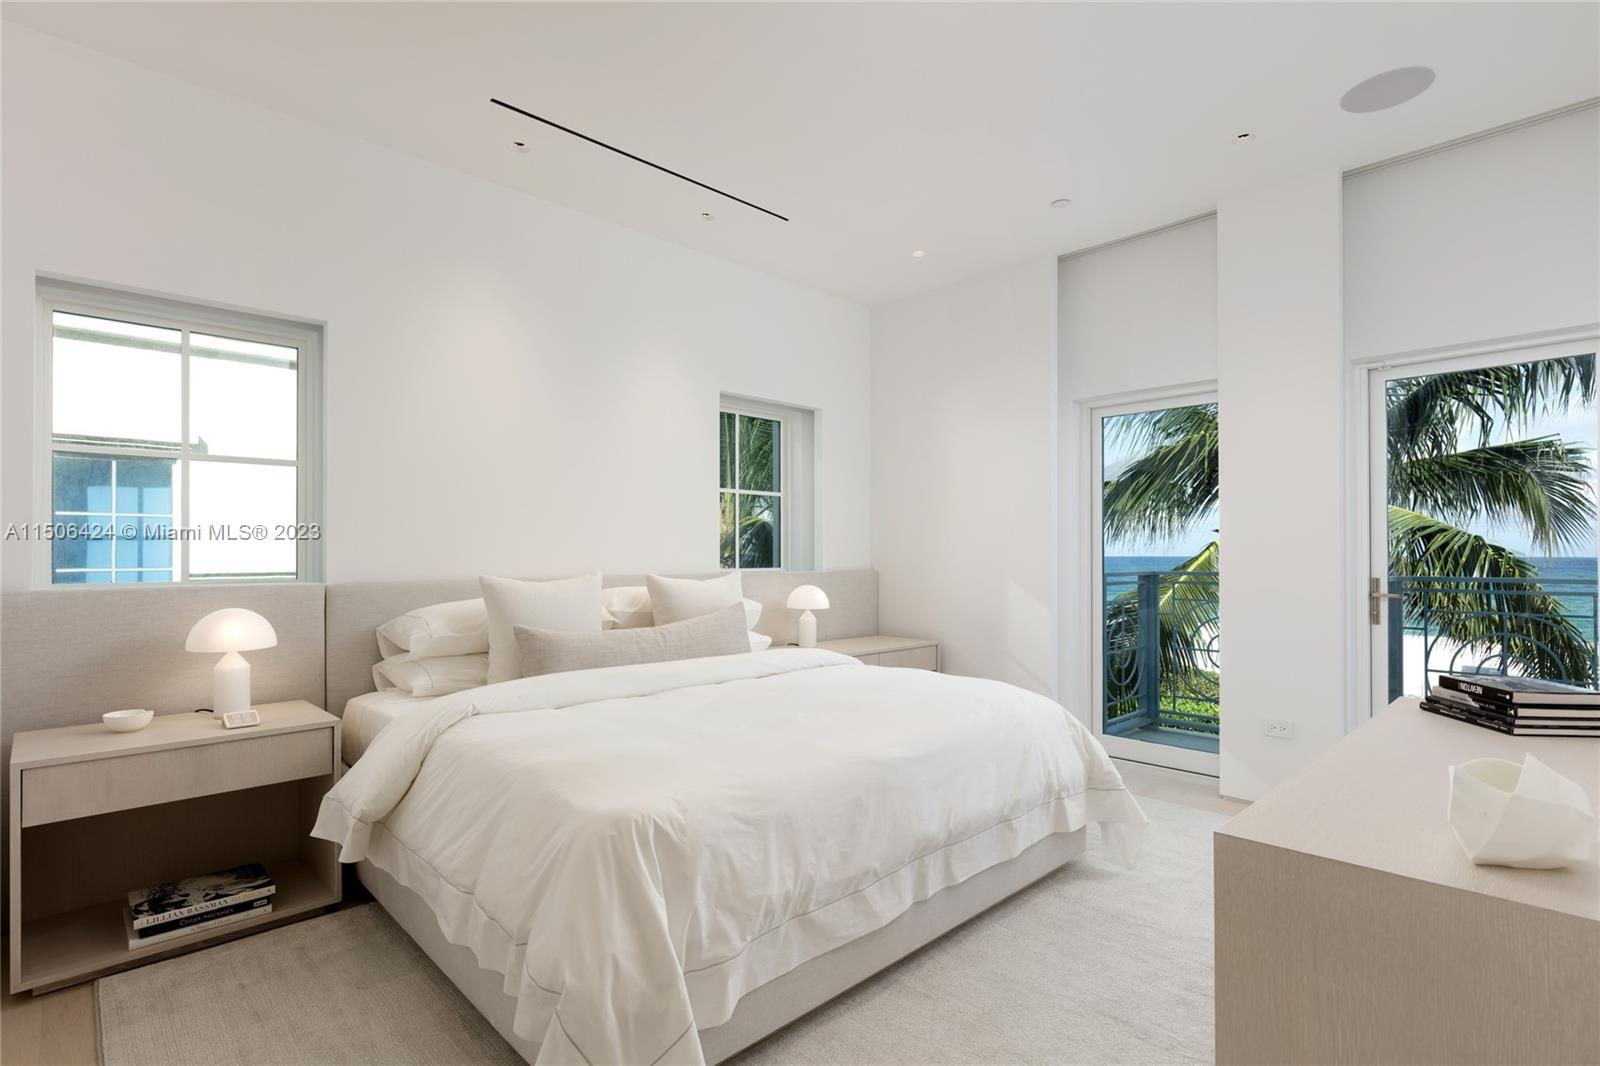 5959 Collins Ave Unit 3005, Miami Beach, Florida, 33140, United States, 4 Bedrooms Bedrooms, ,6 BathroomsBathrooms,Residential,For Sale,5959 Collins Ave Unit 3005,1423998